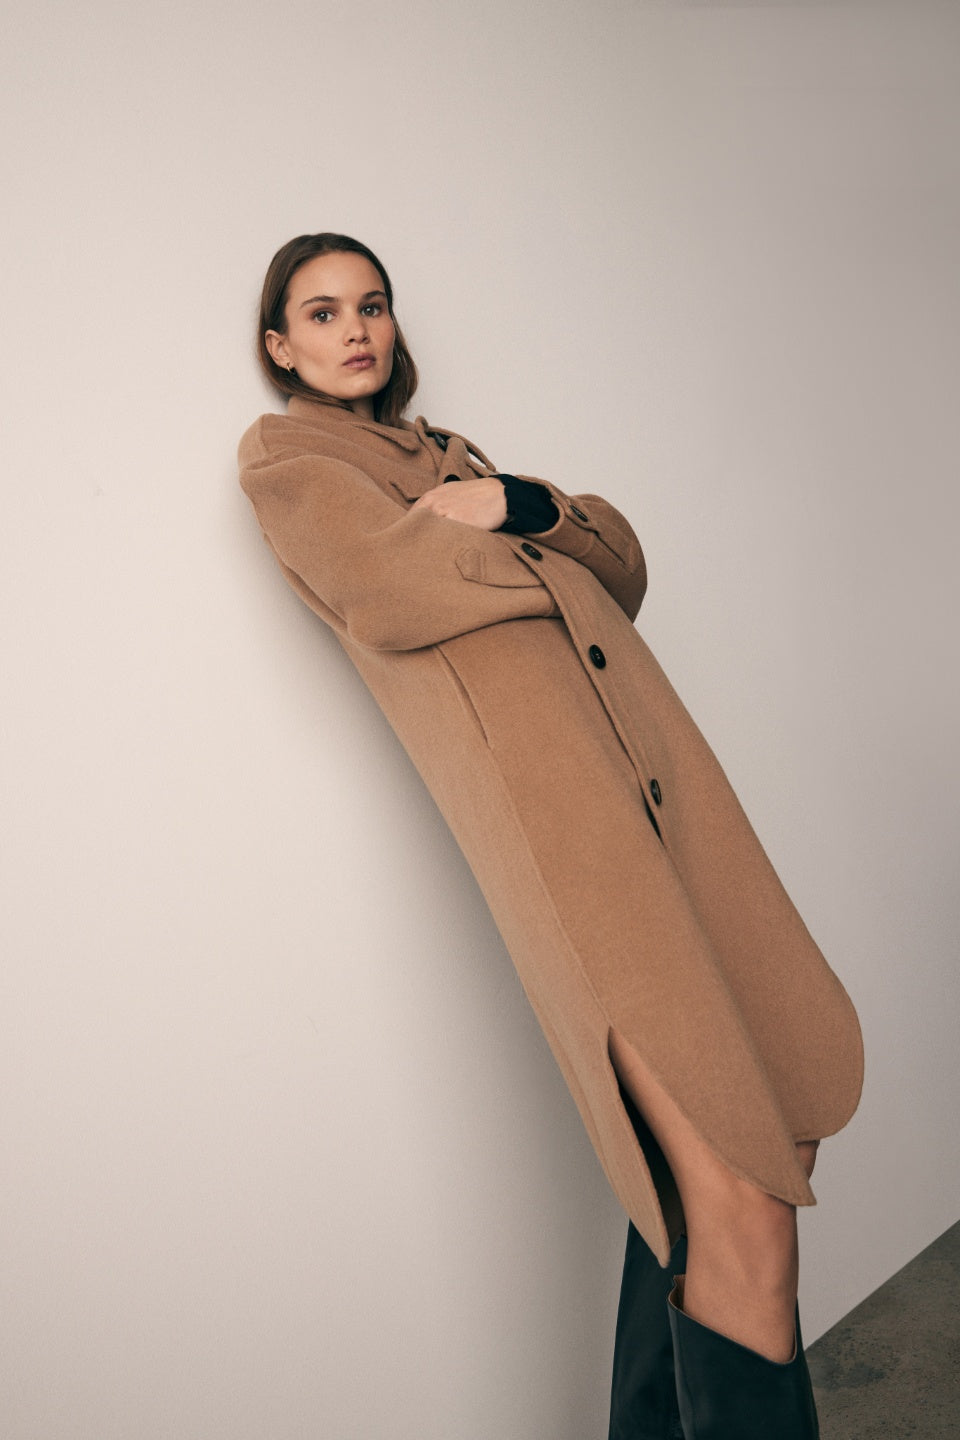 The Stardust Coat in Tan from Esmaee